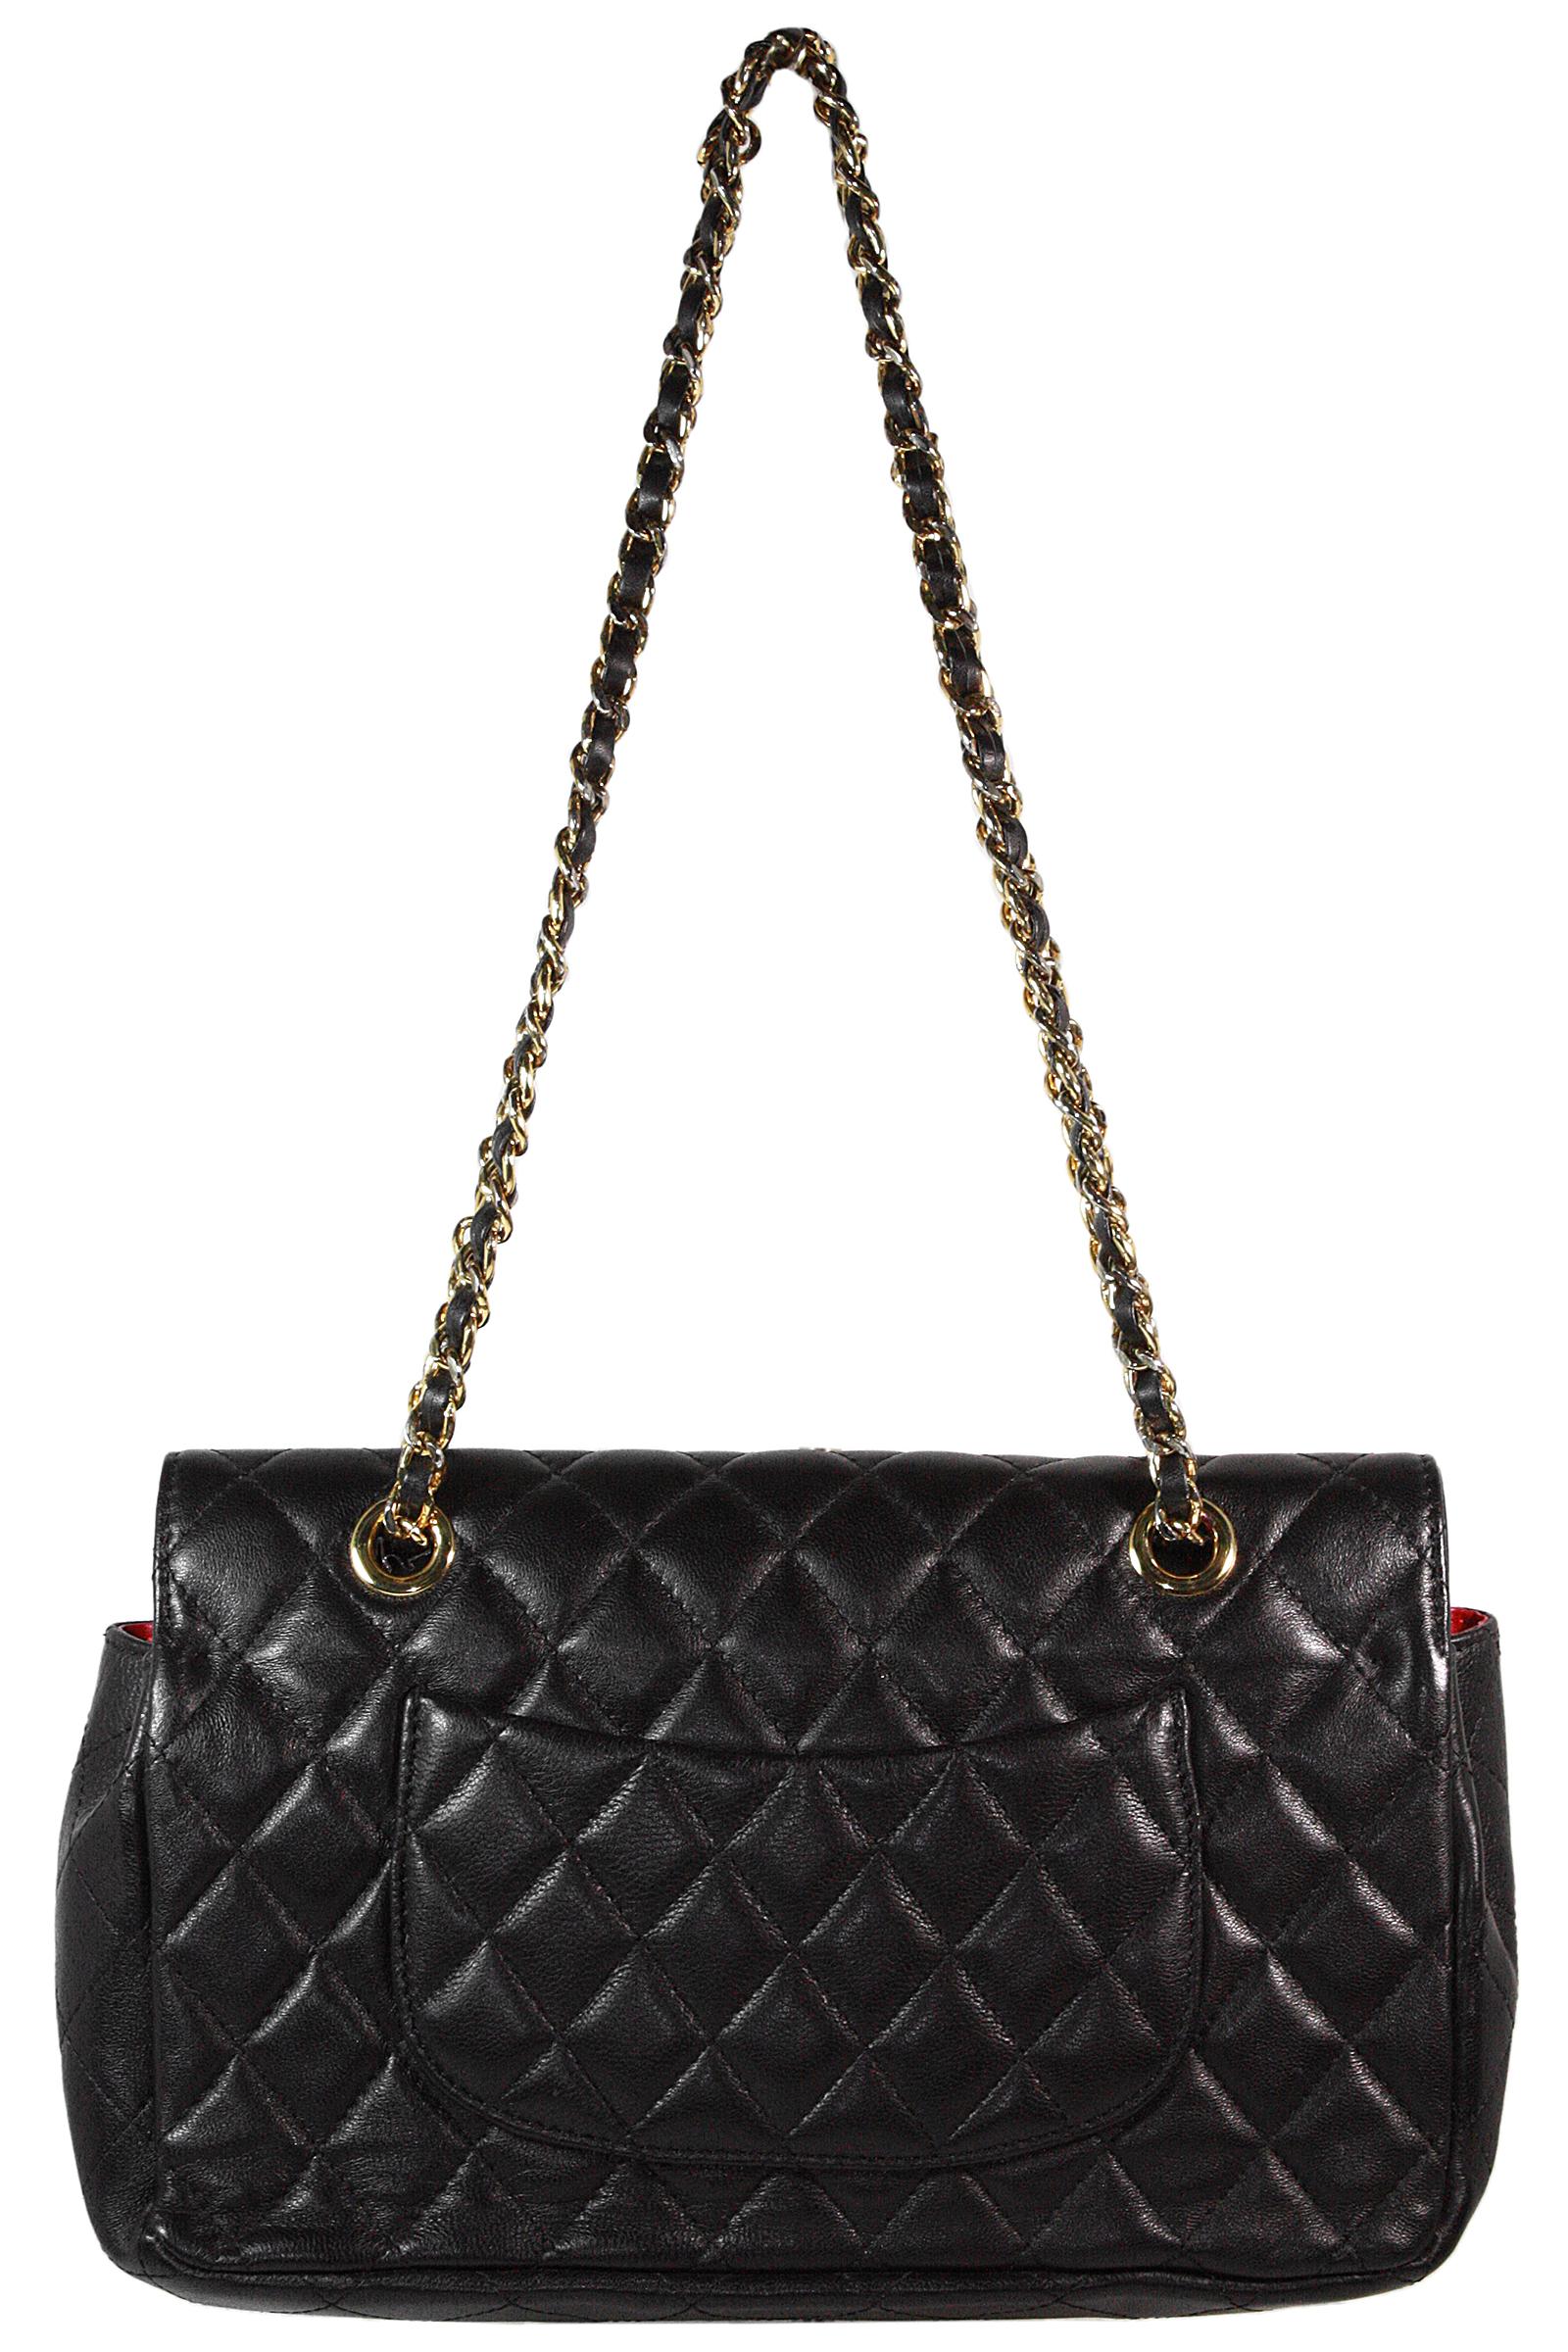 Chanel Black Lambskin Classic Quilted Double Strap Bag In Good Condition In Los Angeles, CA